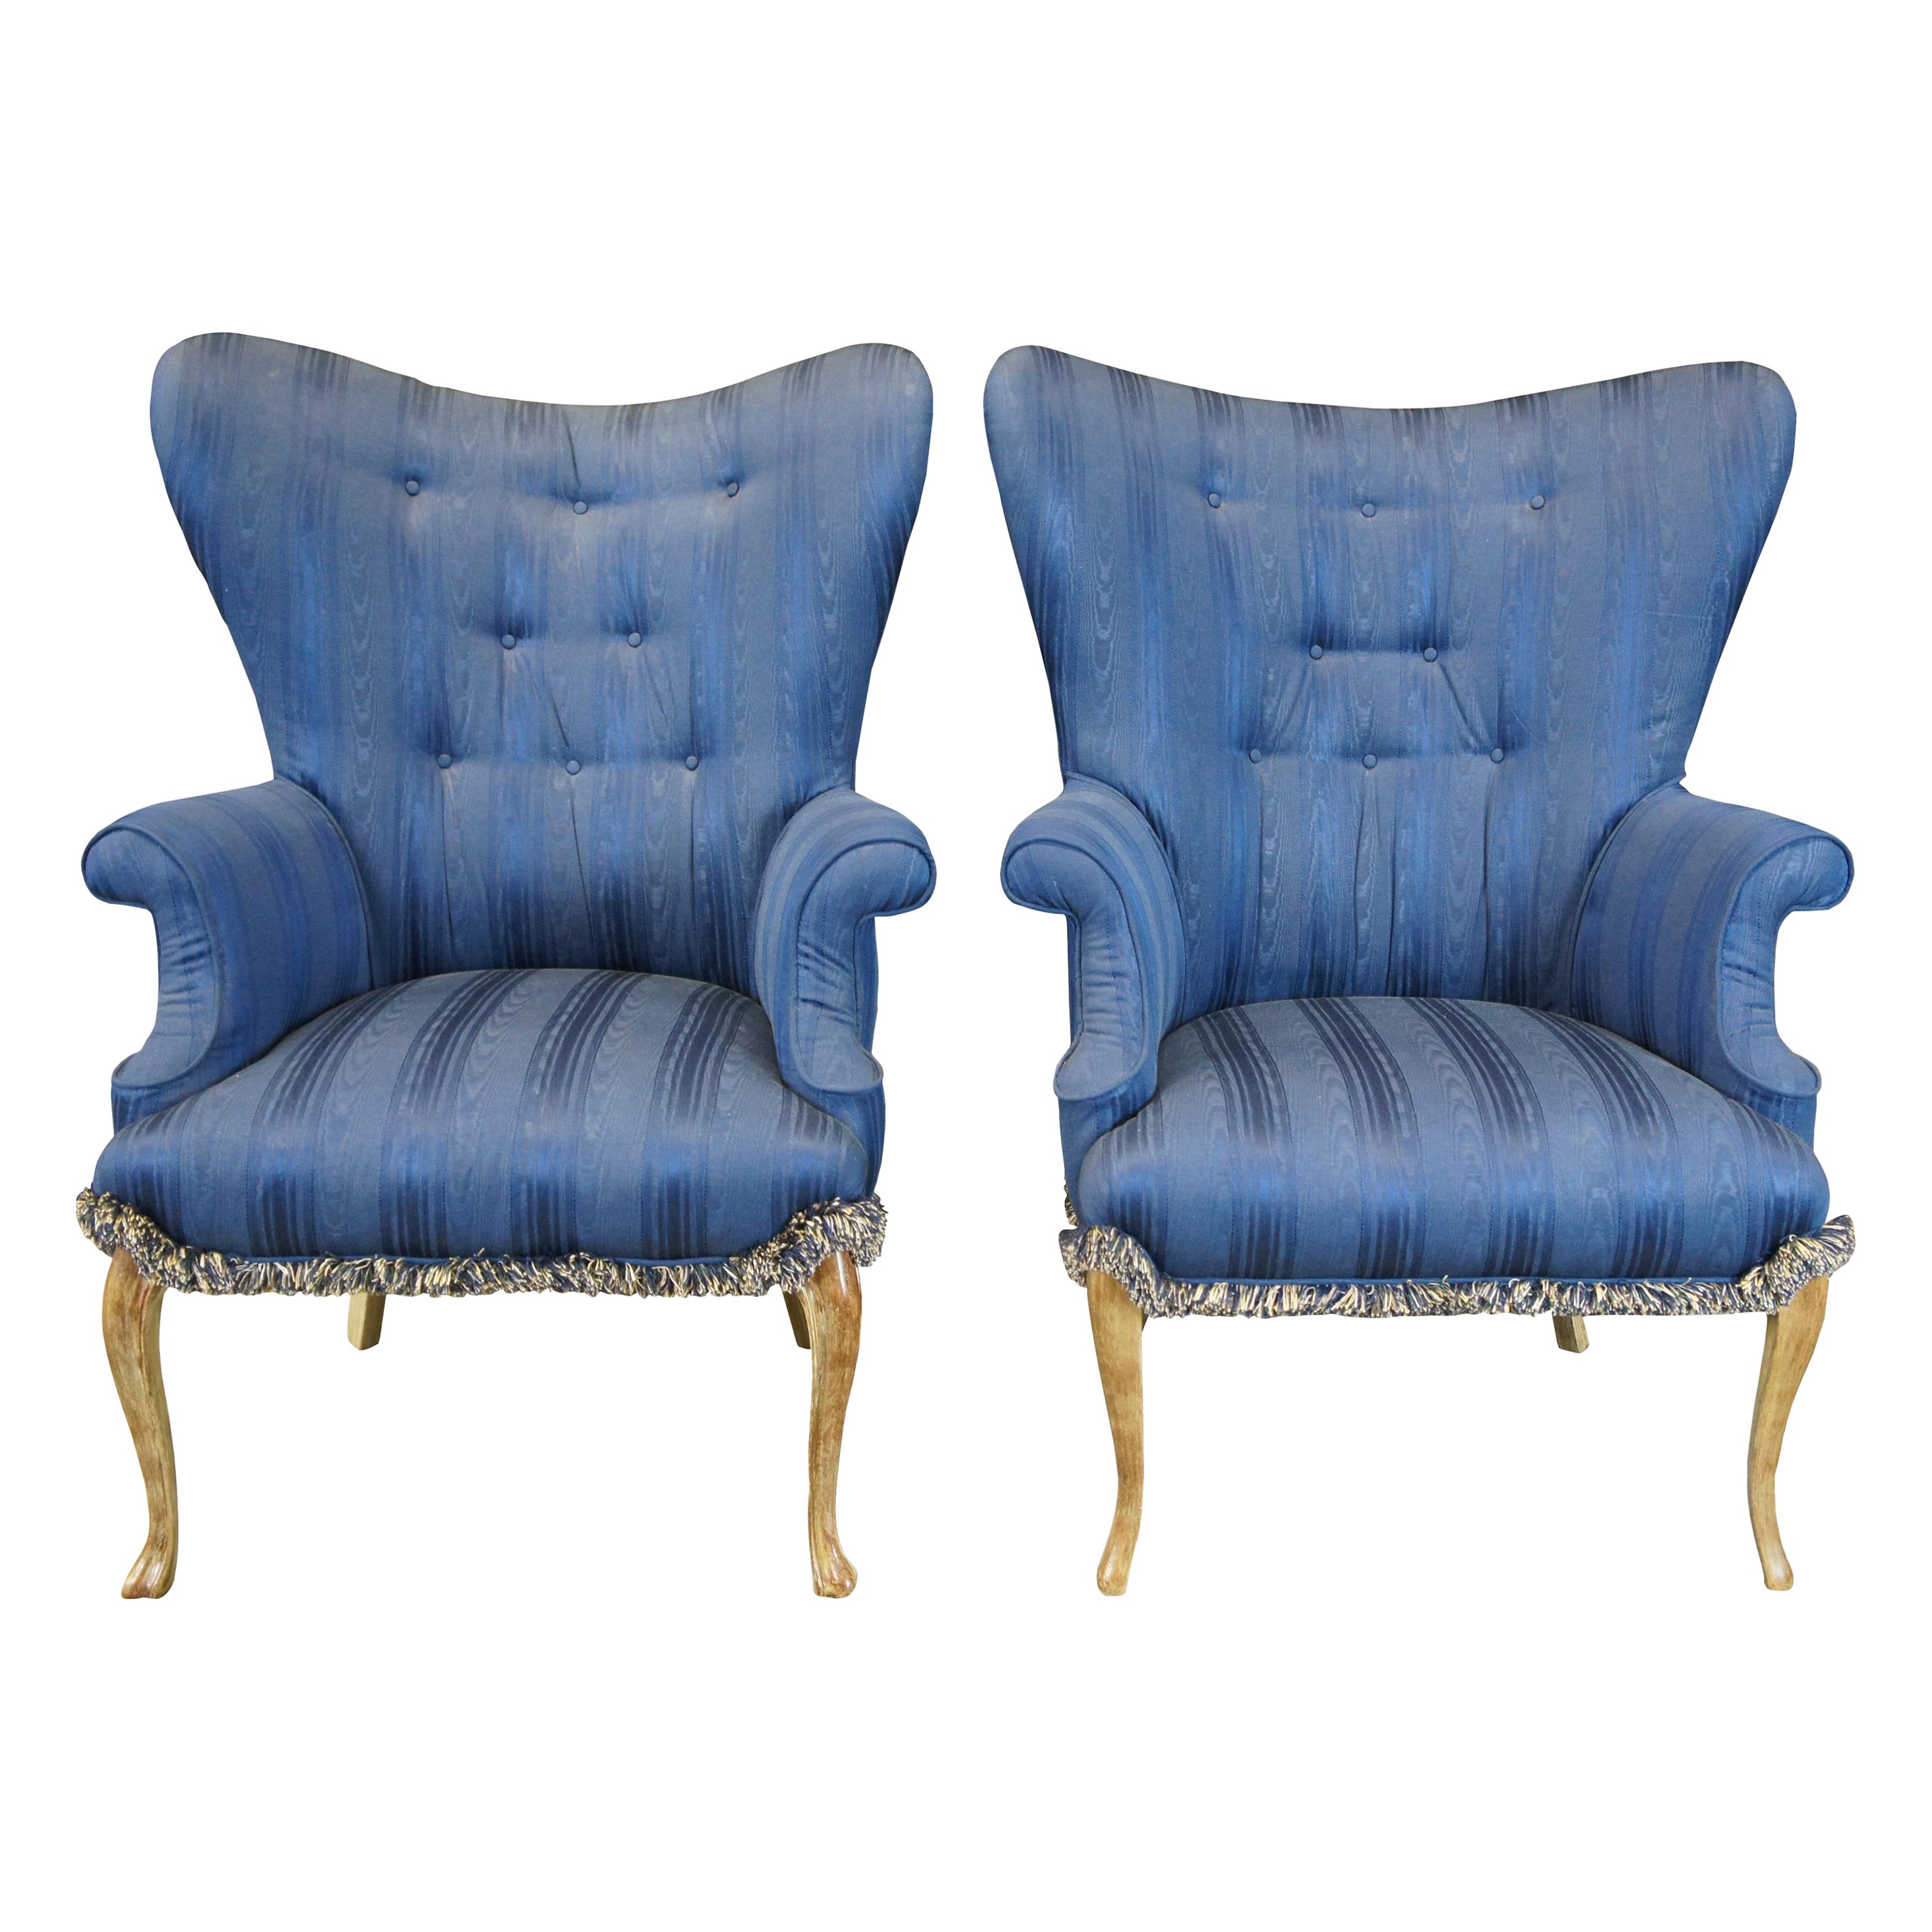 2 Vintage French Provincial Striped Blue Tufted Serpentine Wingback Arm Chair